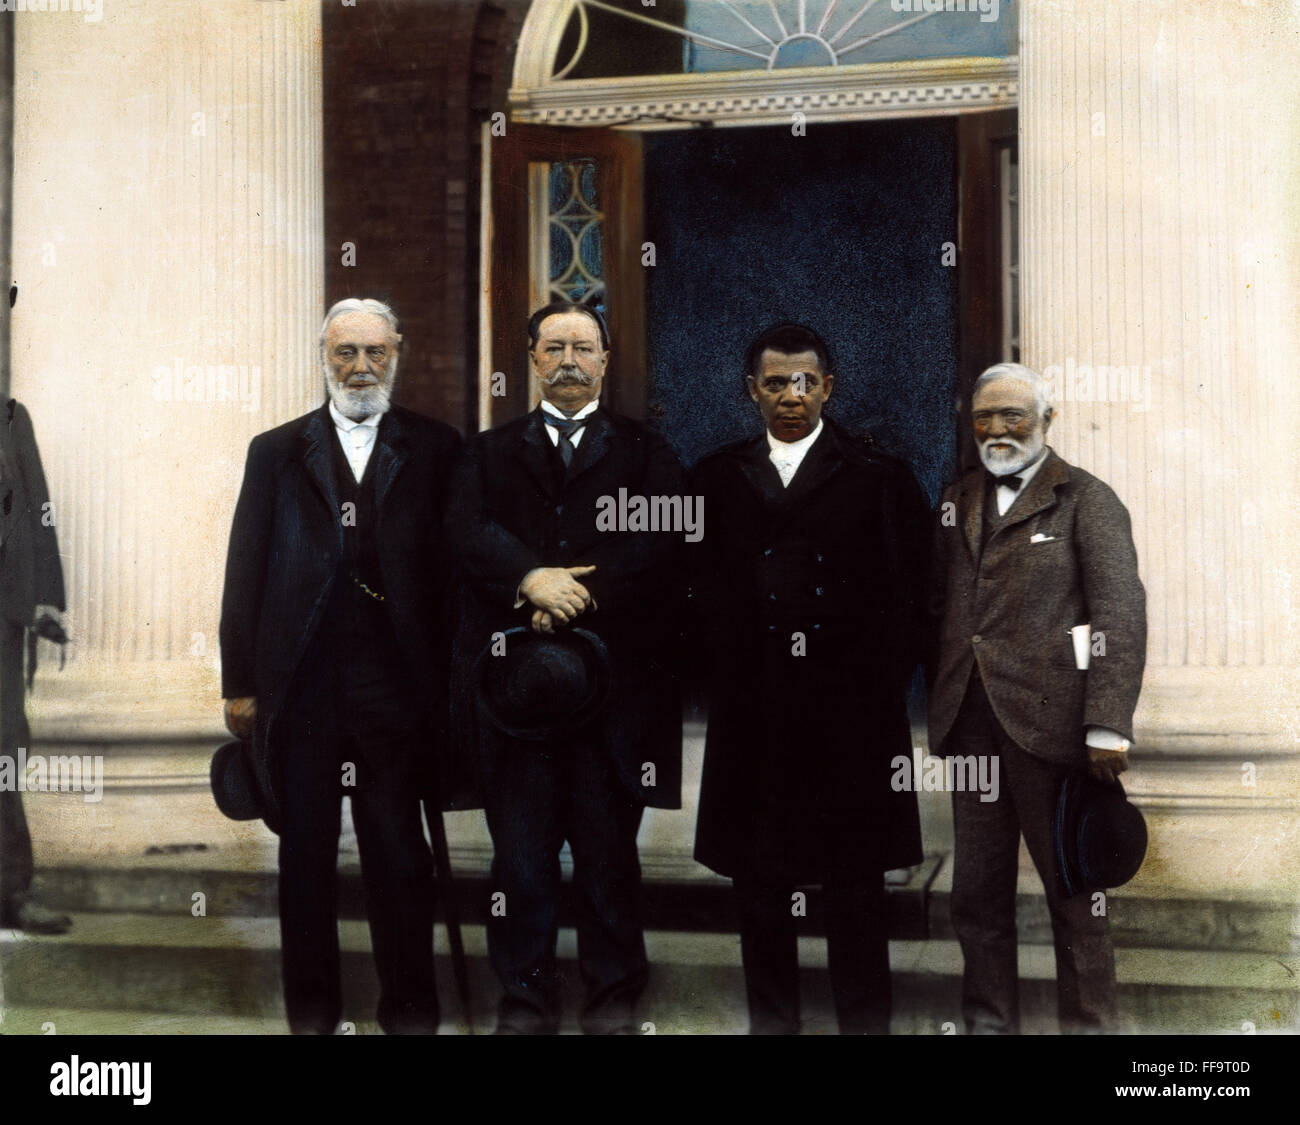 TUSKEGEE INSTITUTE 1906. /nLeft to right: Trustee Robert C. Ogden, William Howard Taft, Booker T. Washington, and Andrew Carnegie at the twenty-fifth anniversary celebration at Tuskegee Institue, Alabama, in 1906. Stock Photo